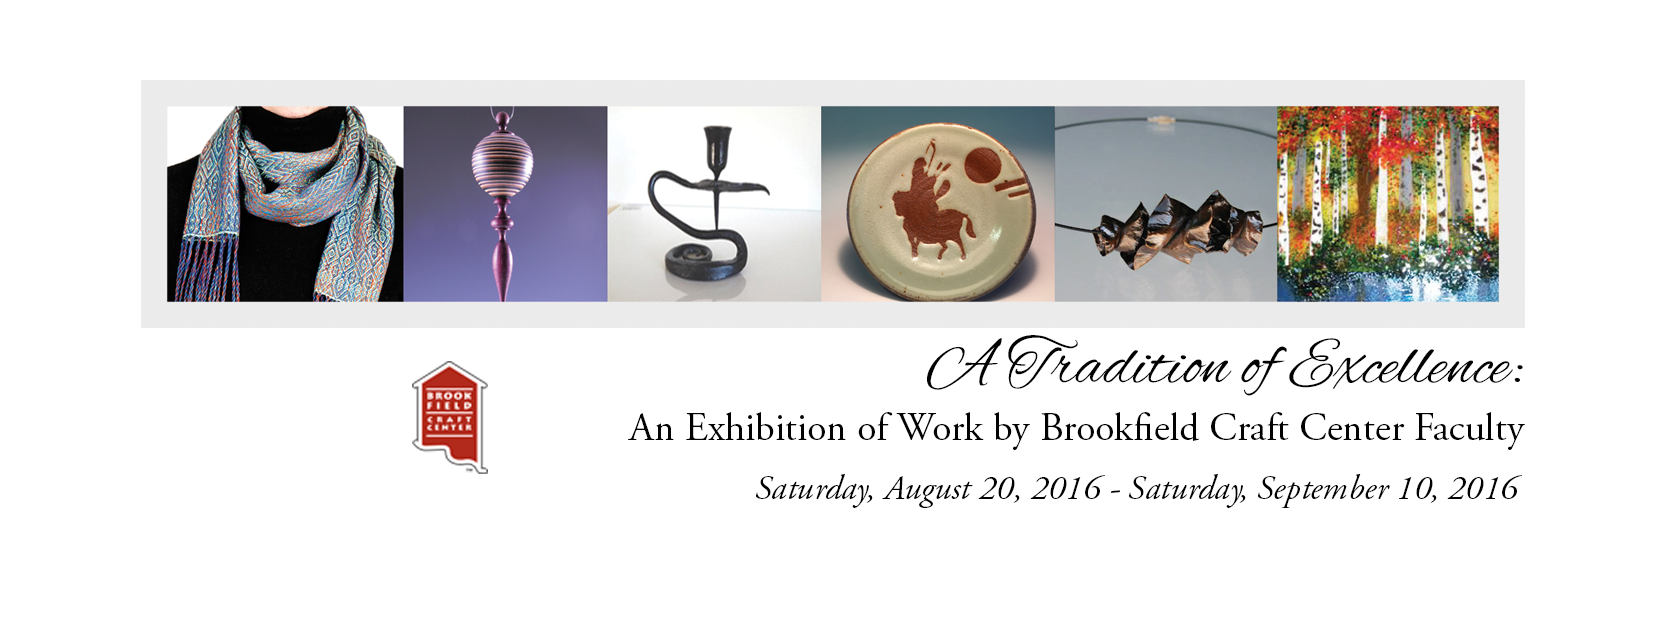 A Tradition of Excellence: An Exhibition of Work by Brookfield Craft Center Faculty